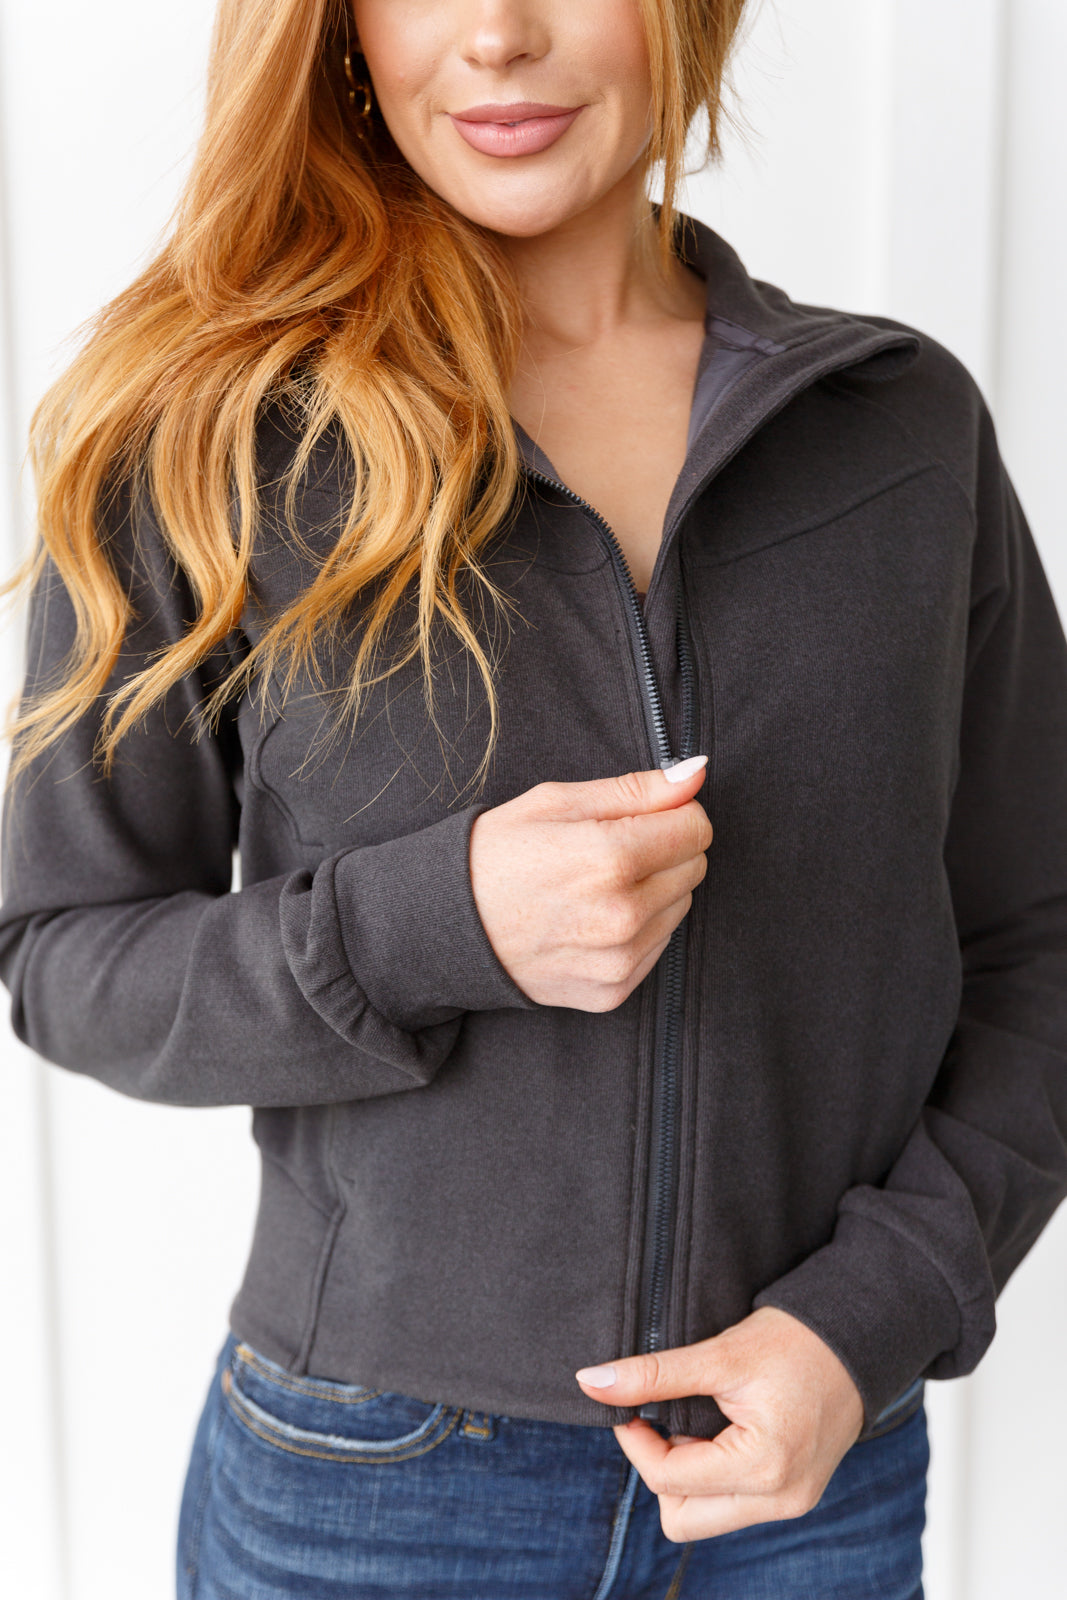 Where Are You Zip Up Jacket in Black - FamFancy Boutique